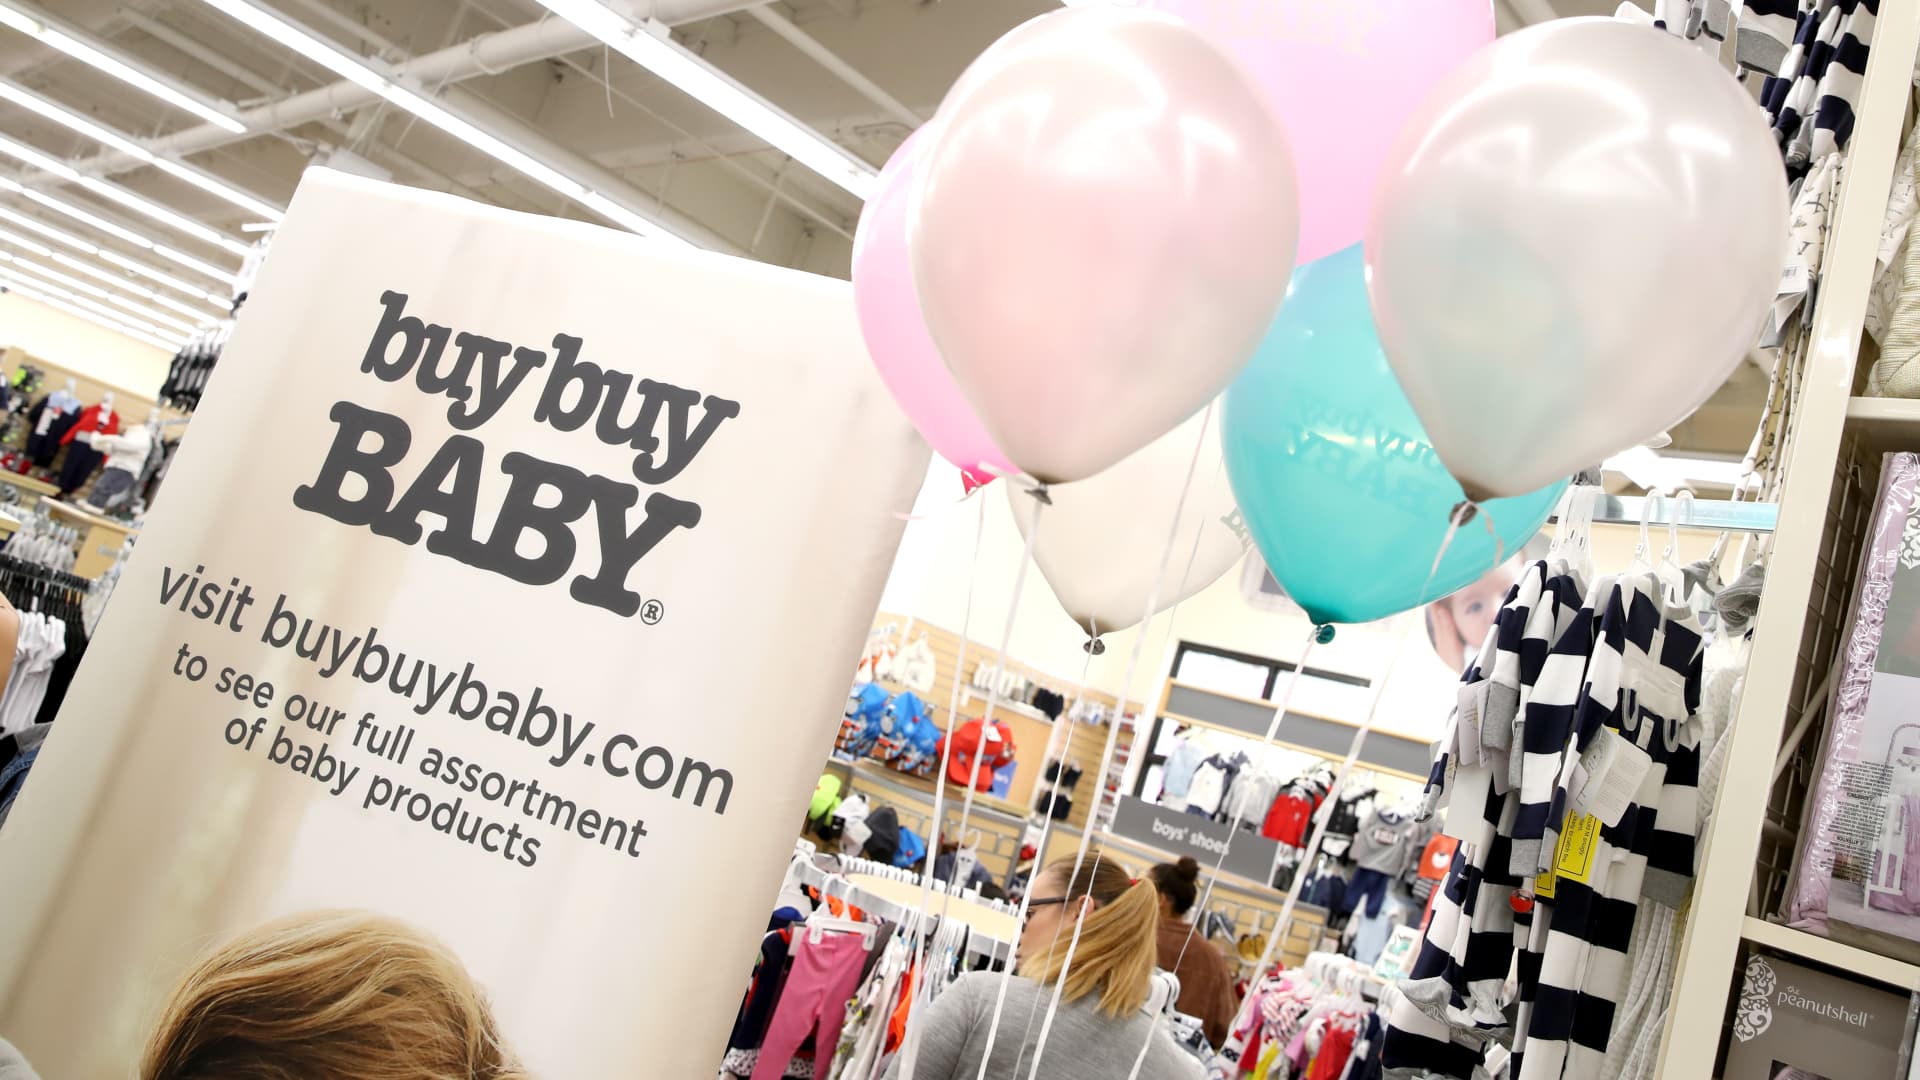 Bed Bath & Beyond says it’s still open to selling its Buybuy Baby division